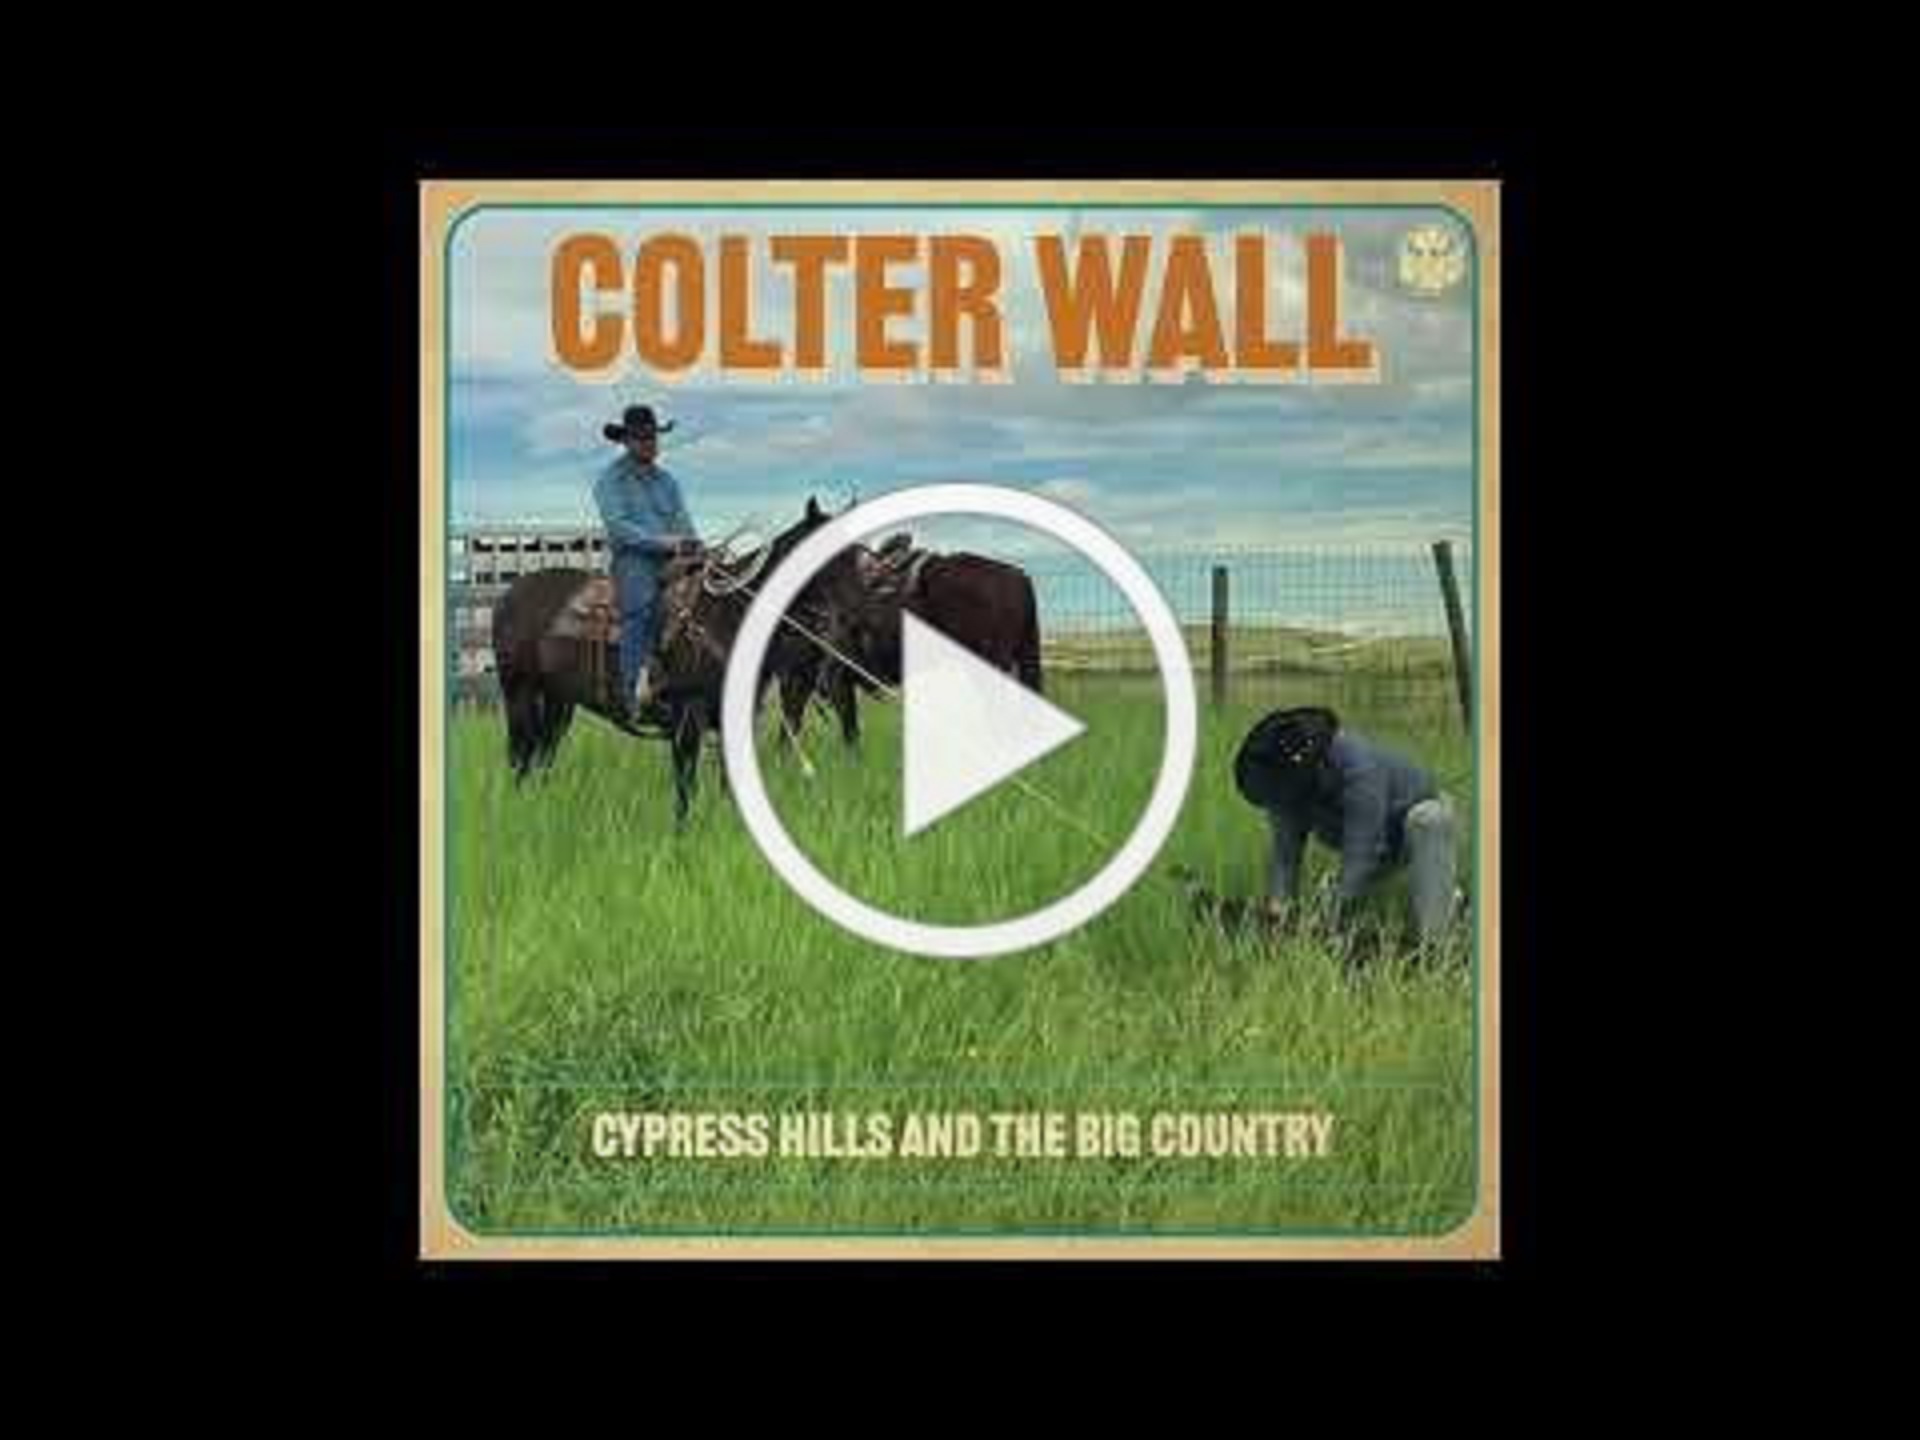 Colter Wall Releases Two New Singles with La Honda Records